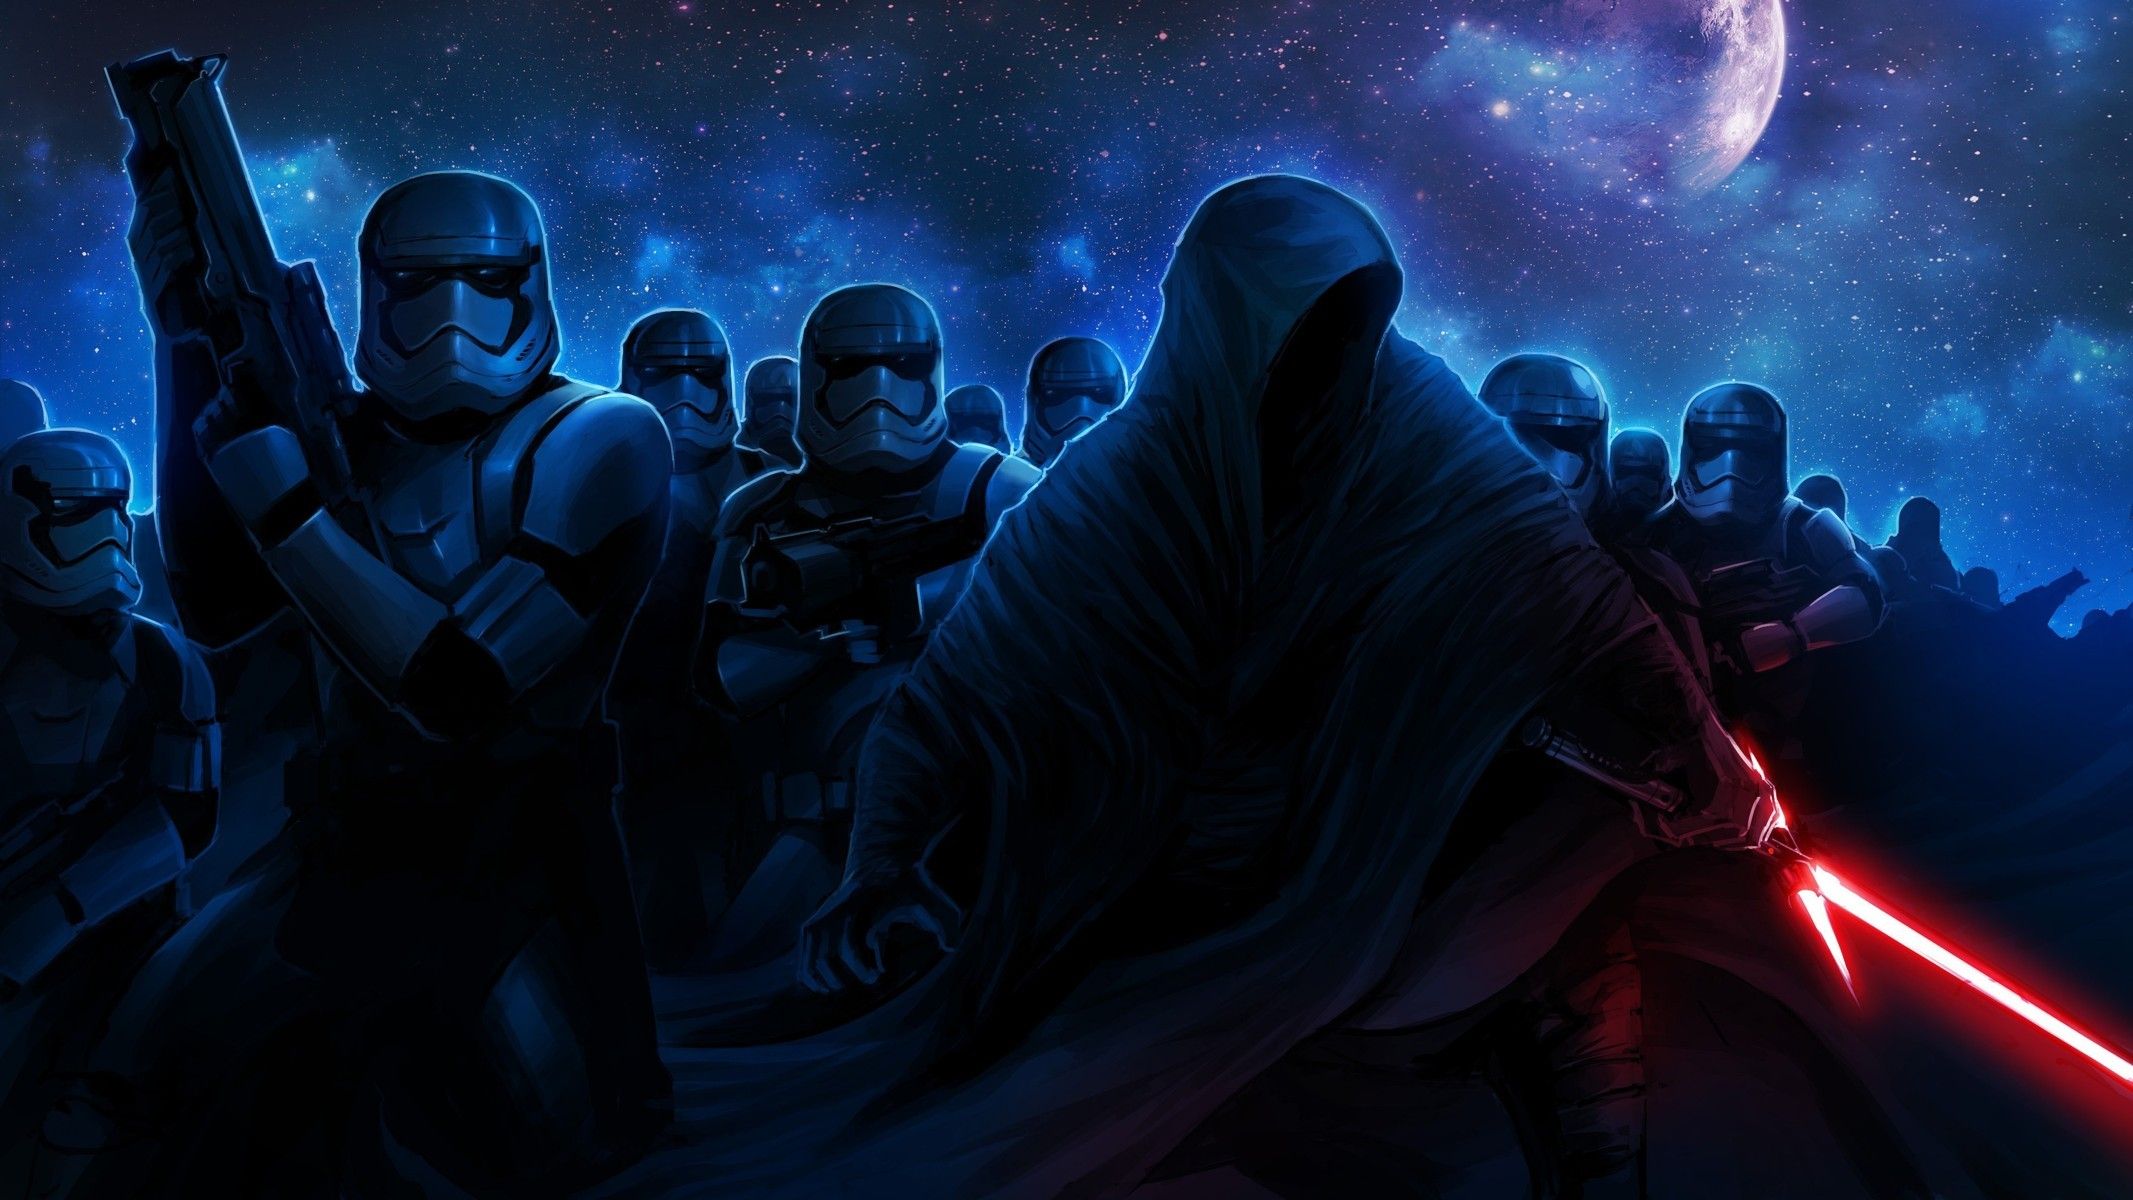 Cool Star Wars Background Hd. wallpaperwide